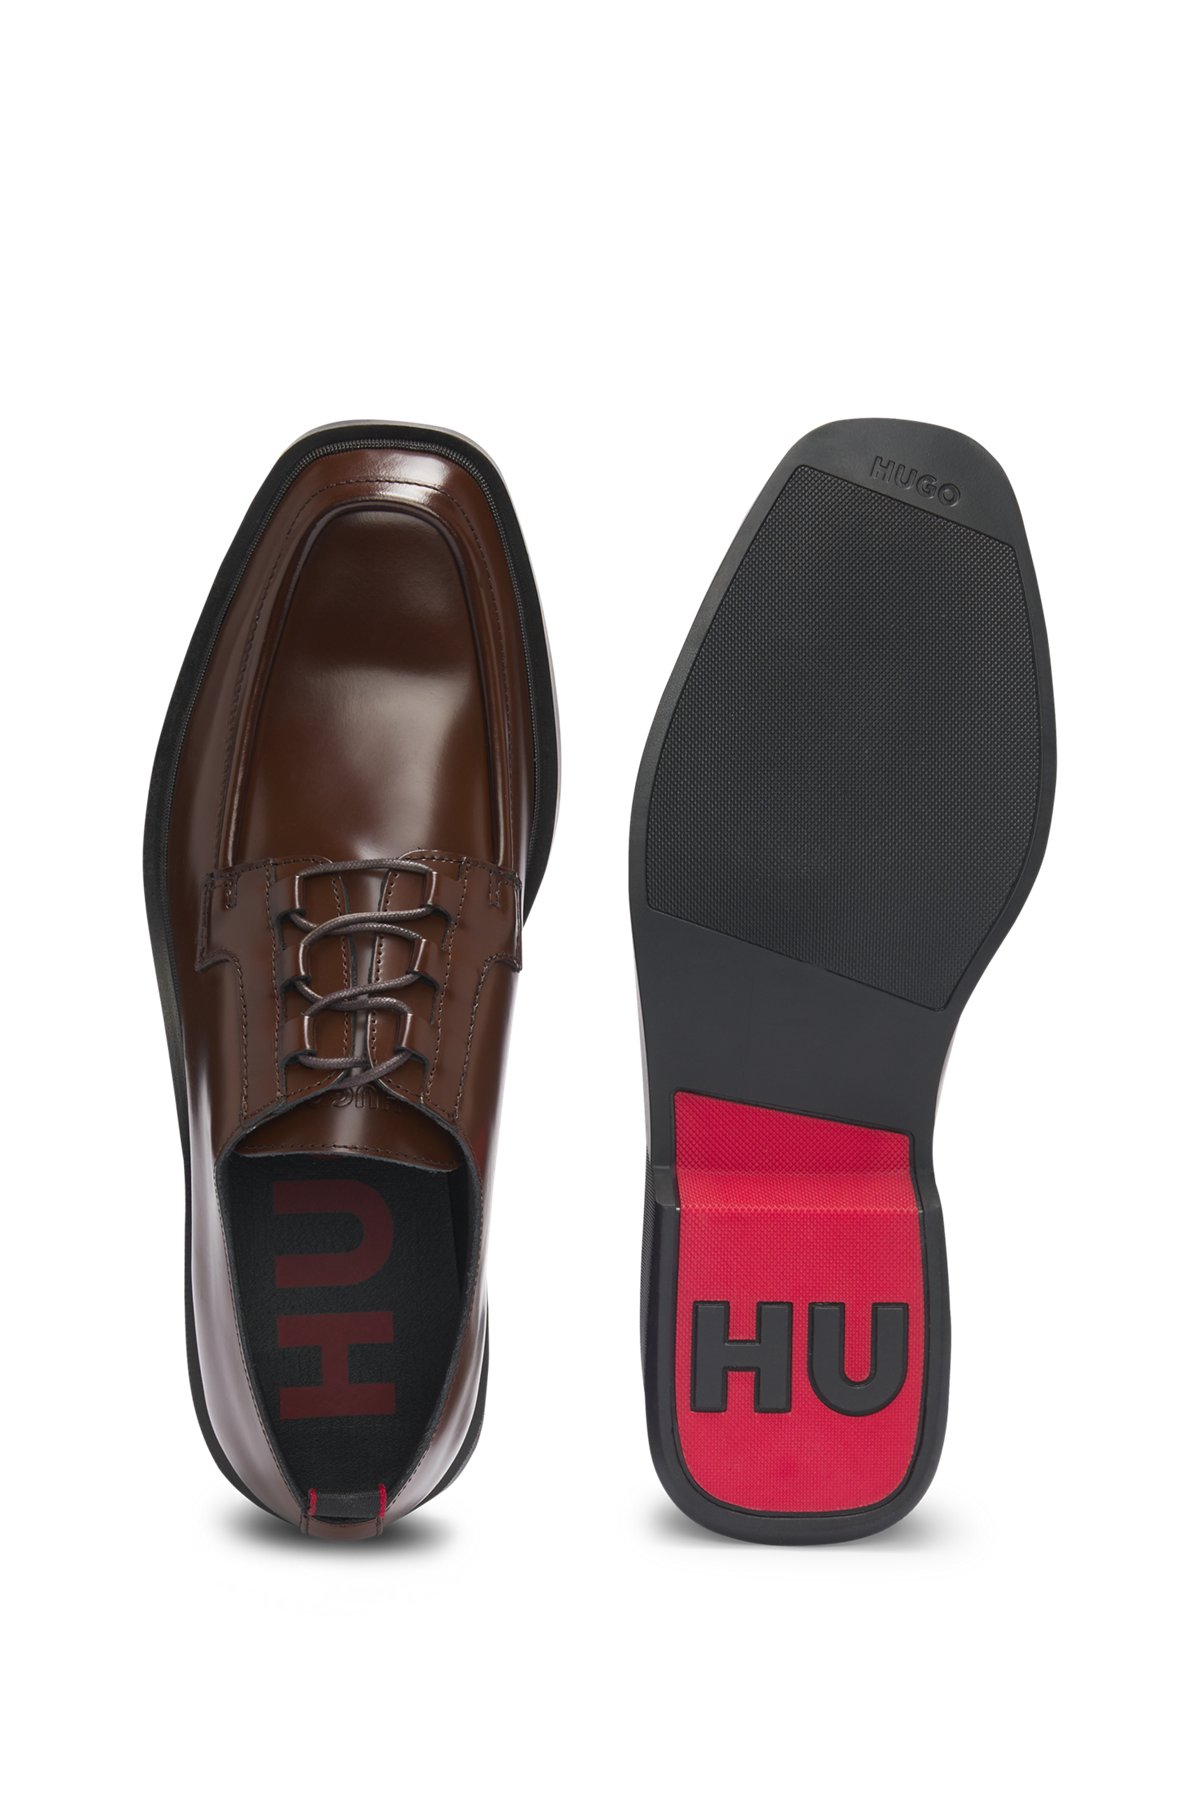 HUGO - Square-toe Derby shoes in leather with piping details